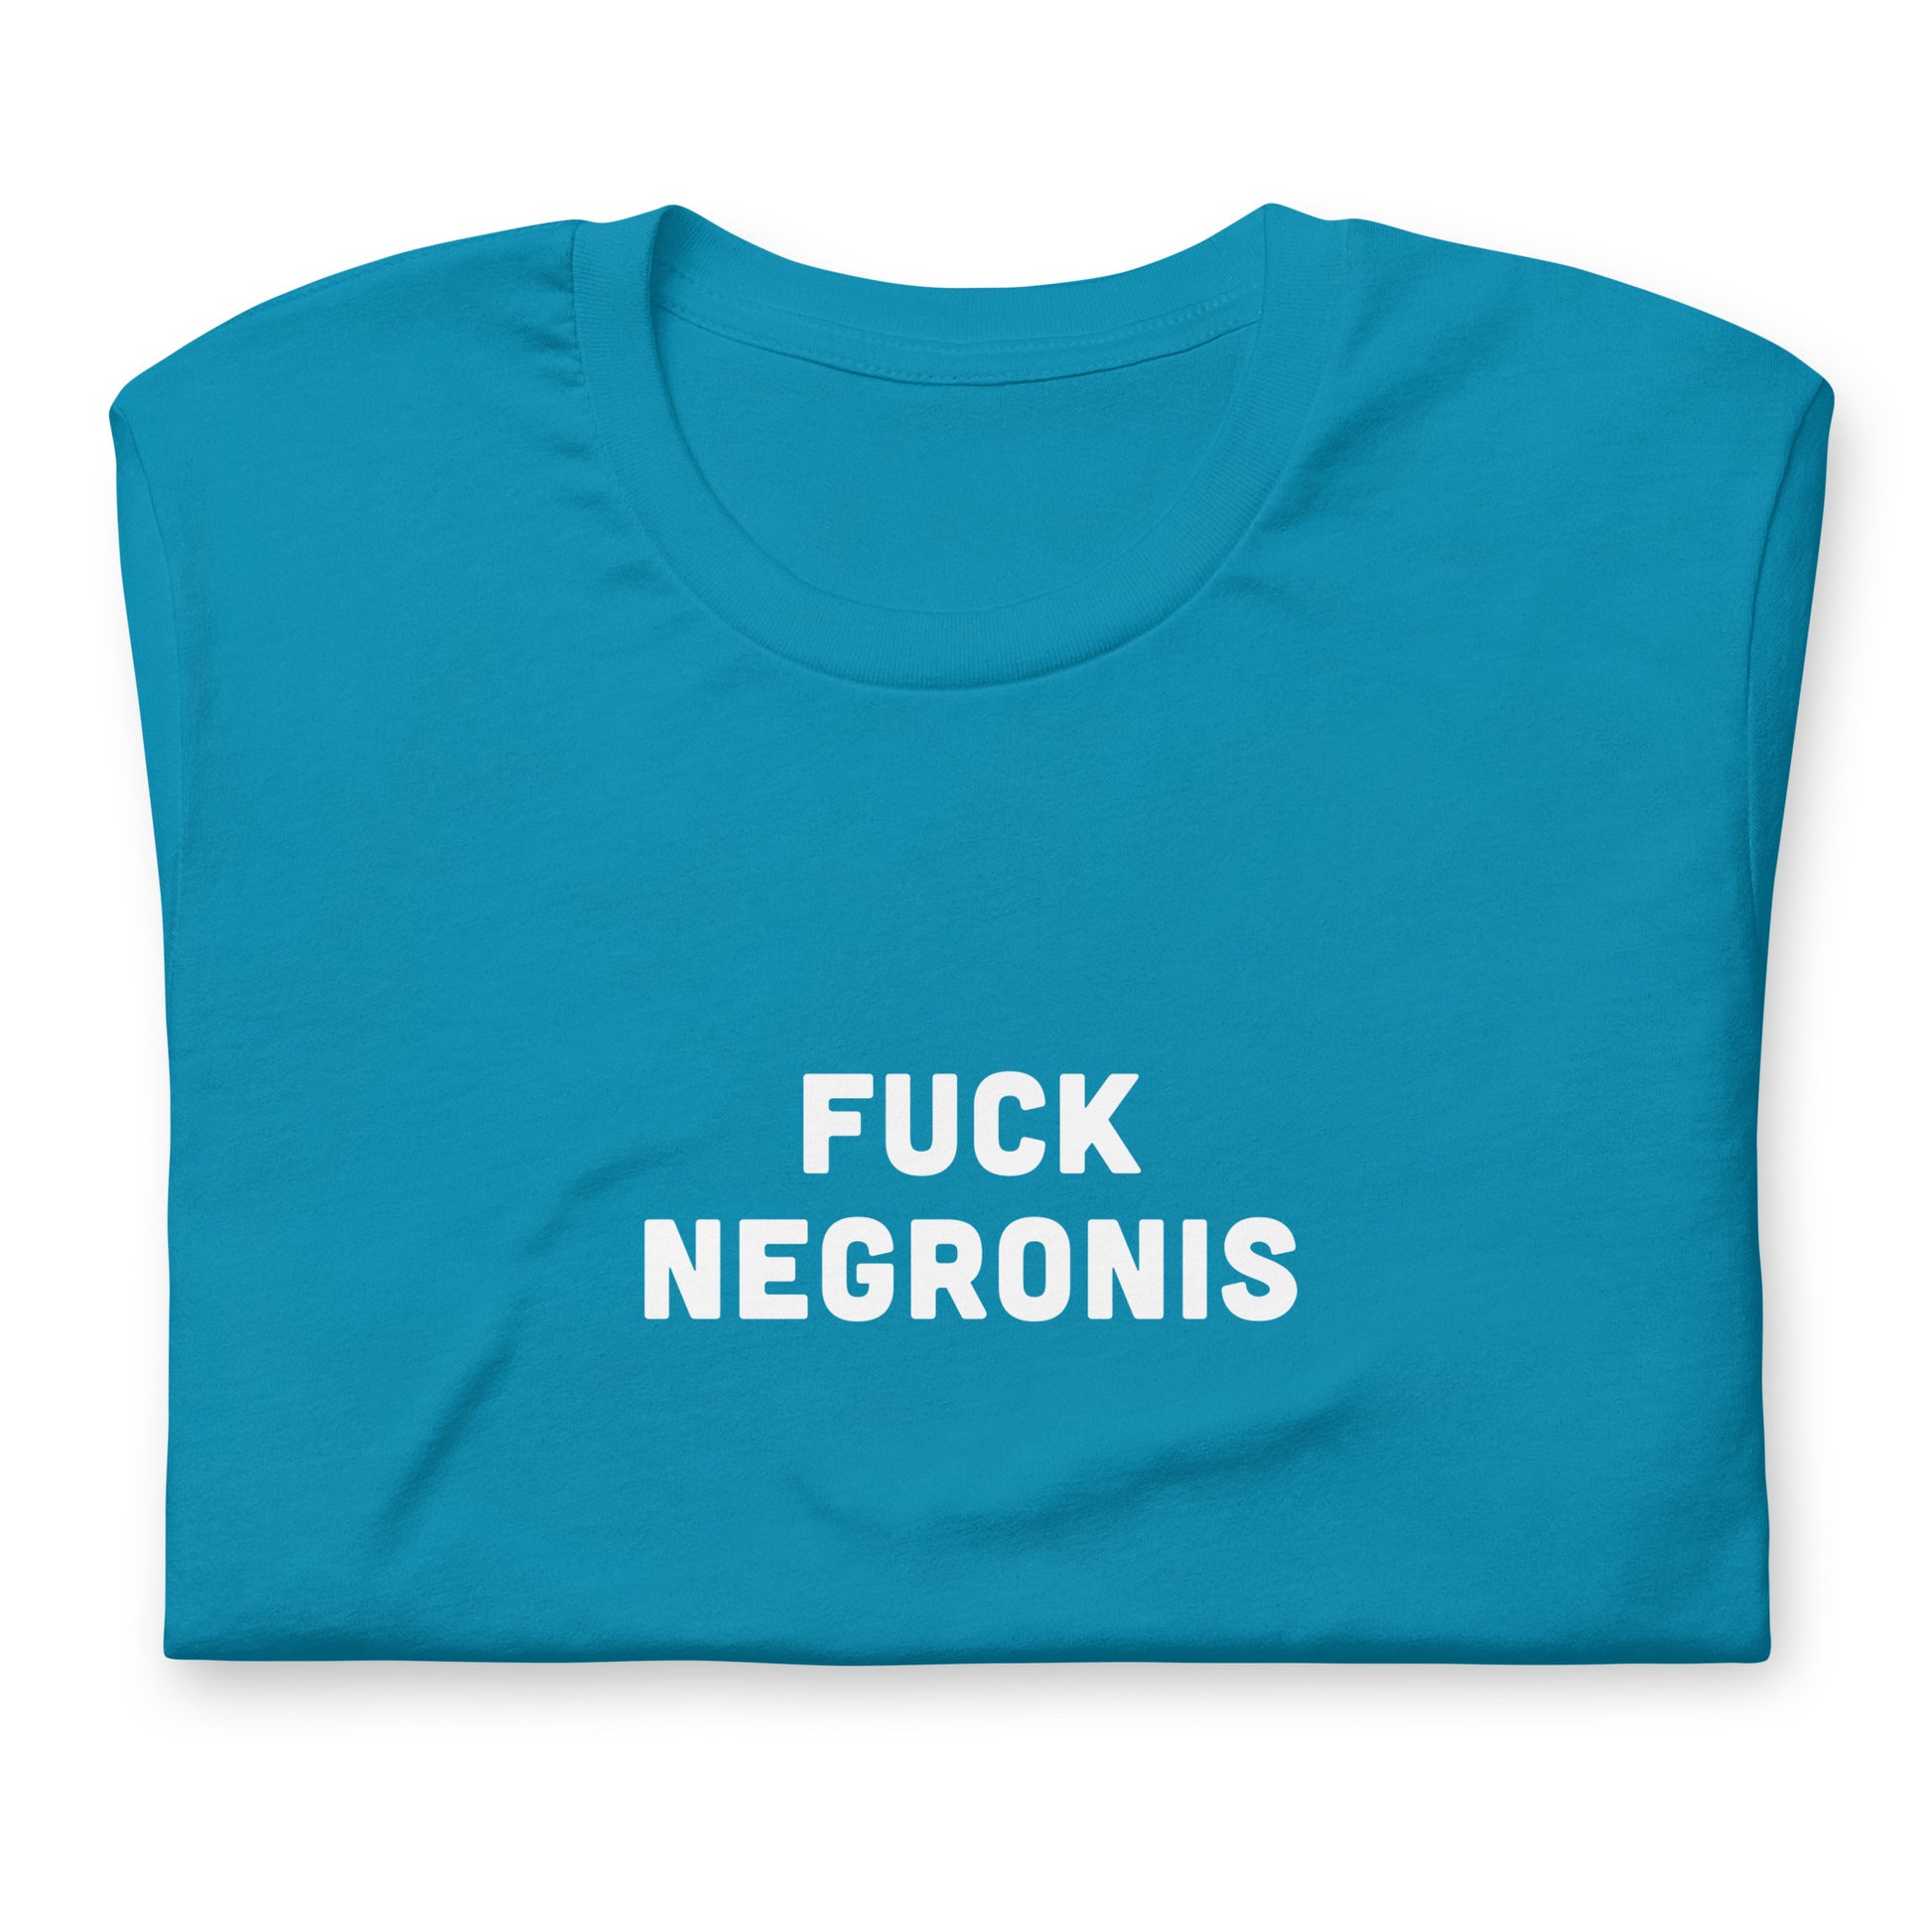 Fuck Negronis T-Shirt Size XL Color Navy